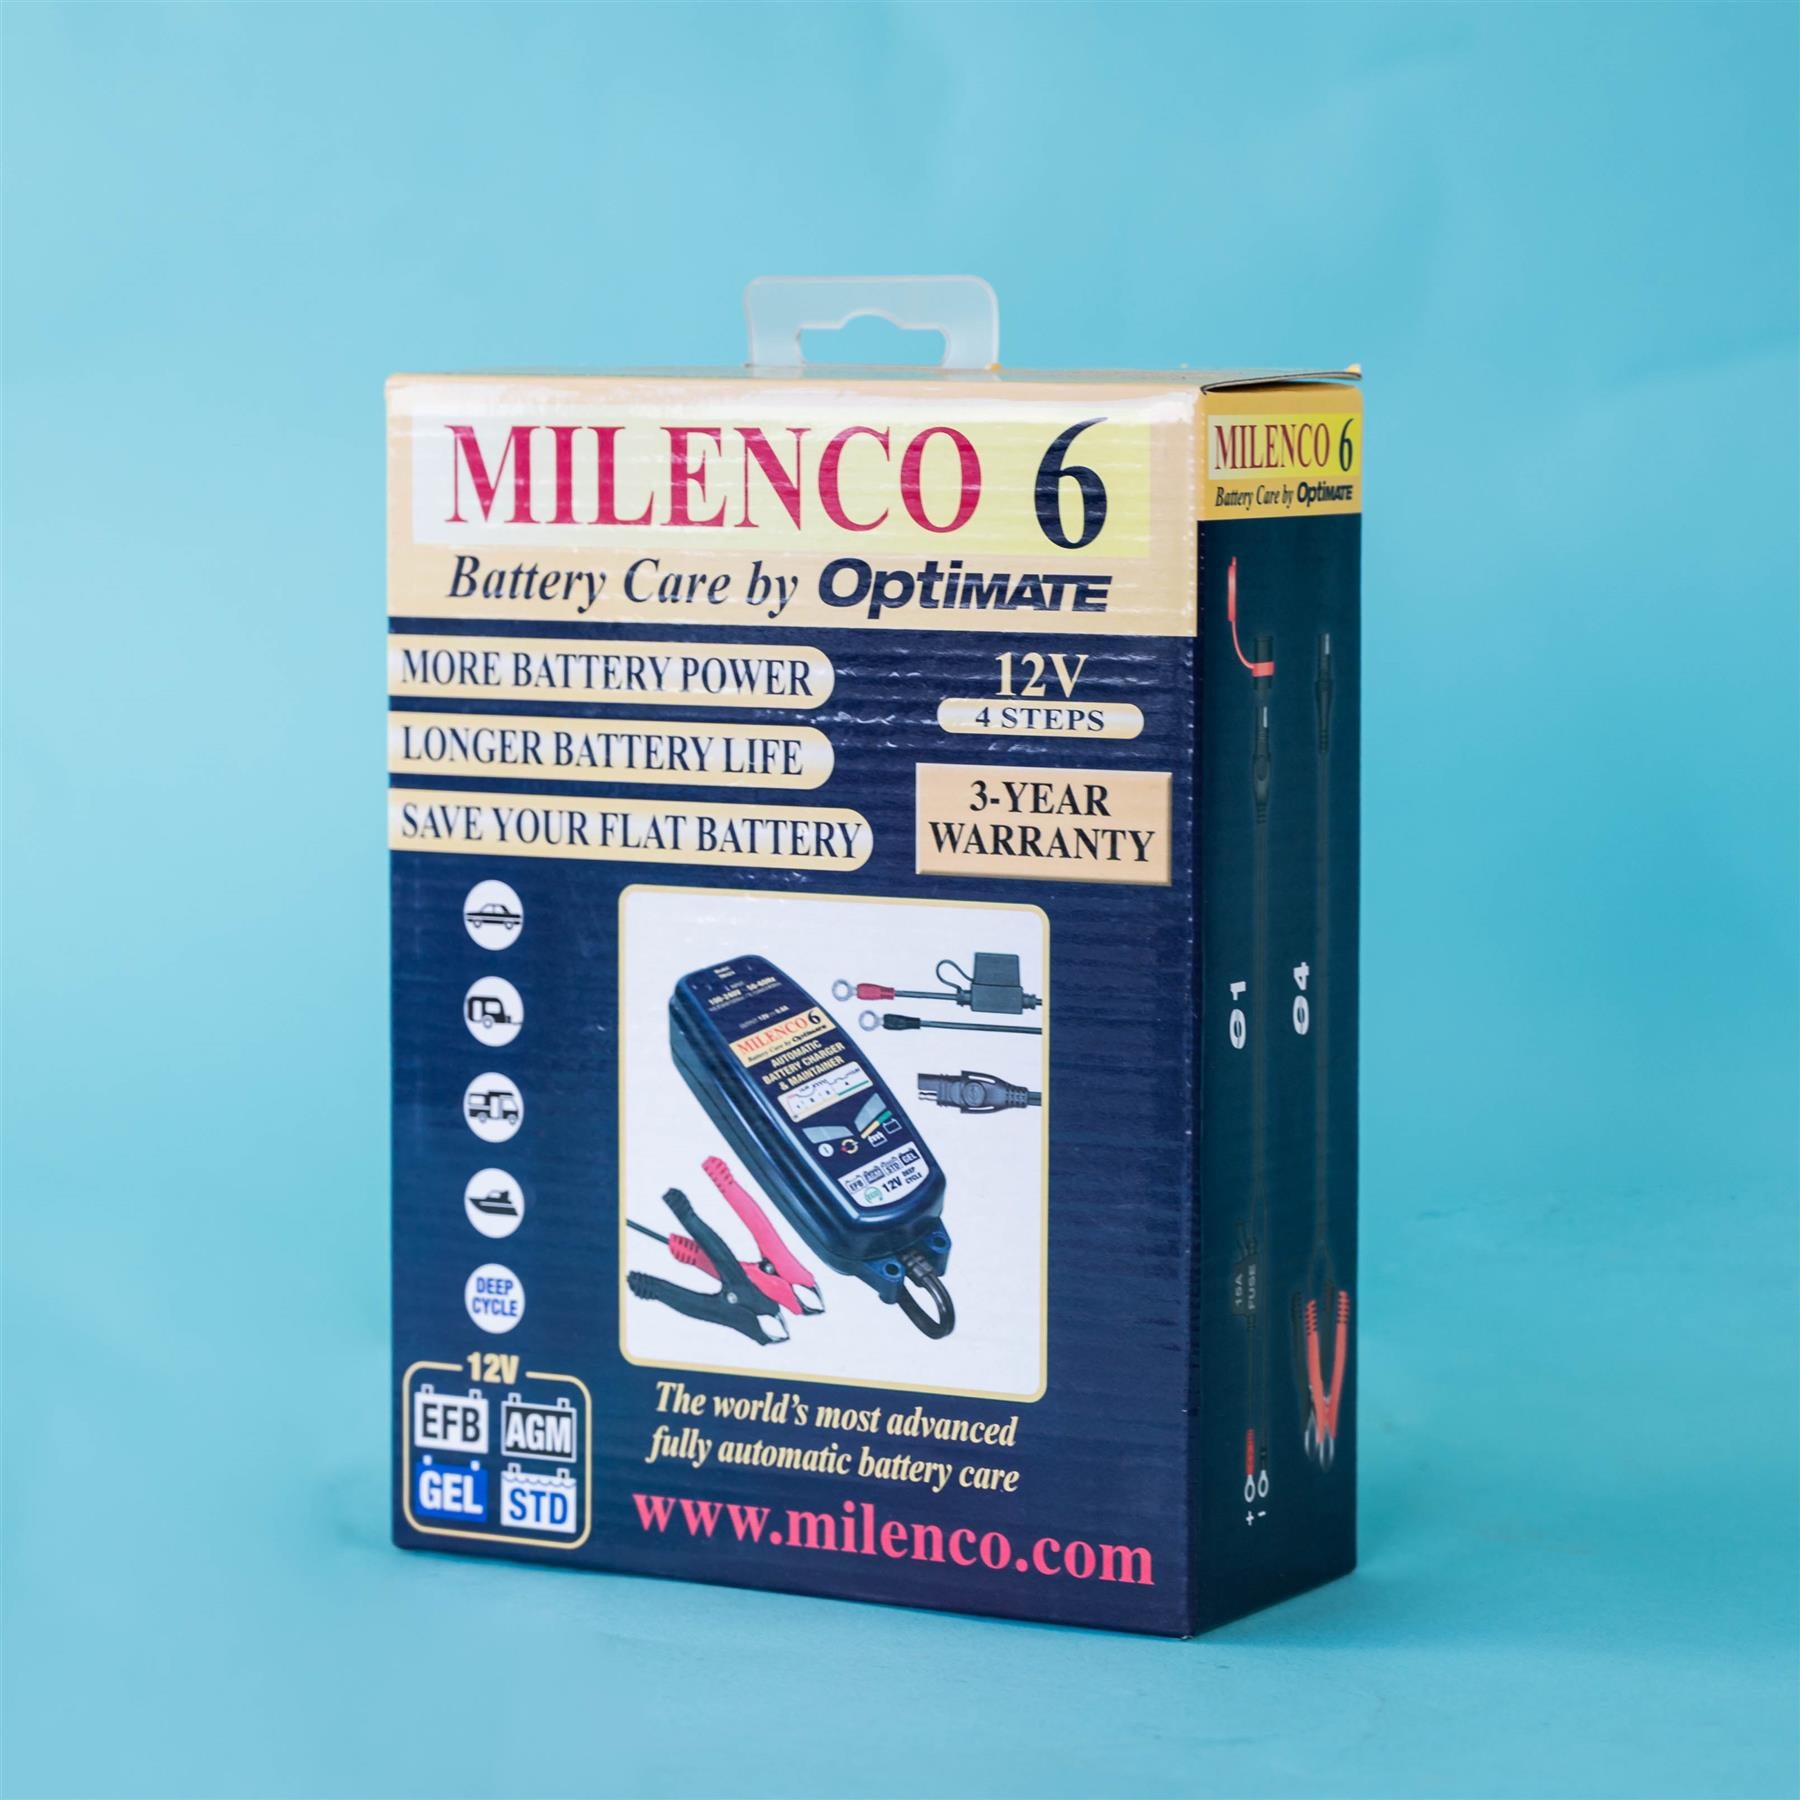 Milenco 6 by Optimate - Milenco, Europe's leading manufacturer of award  winning caravan products